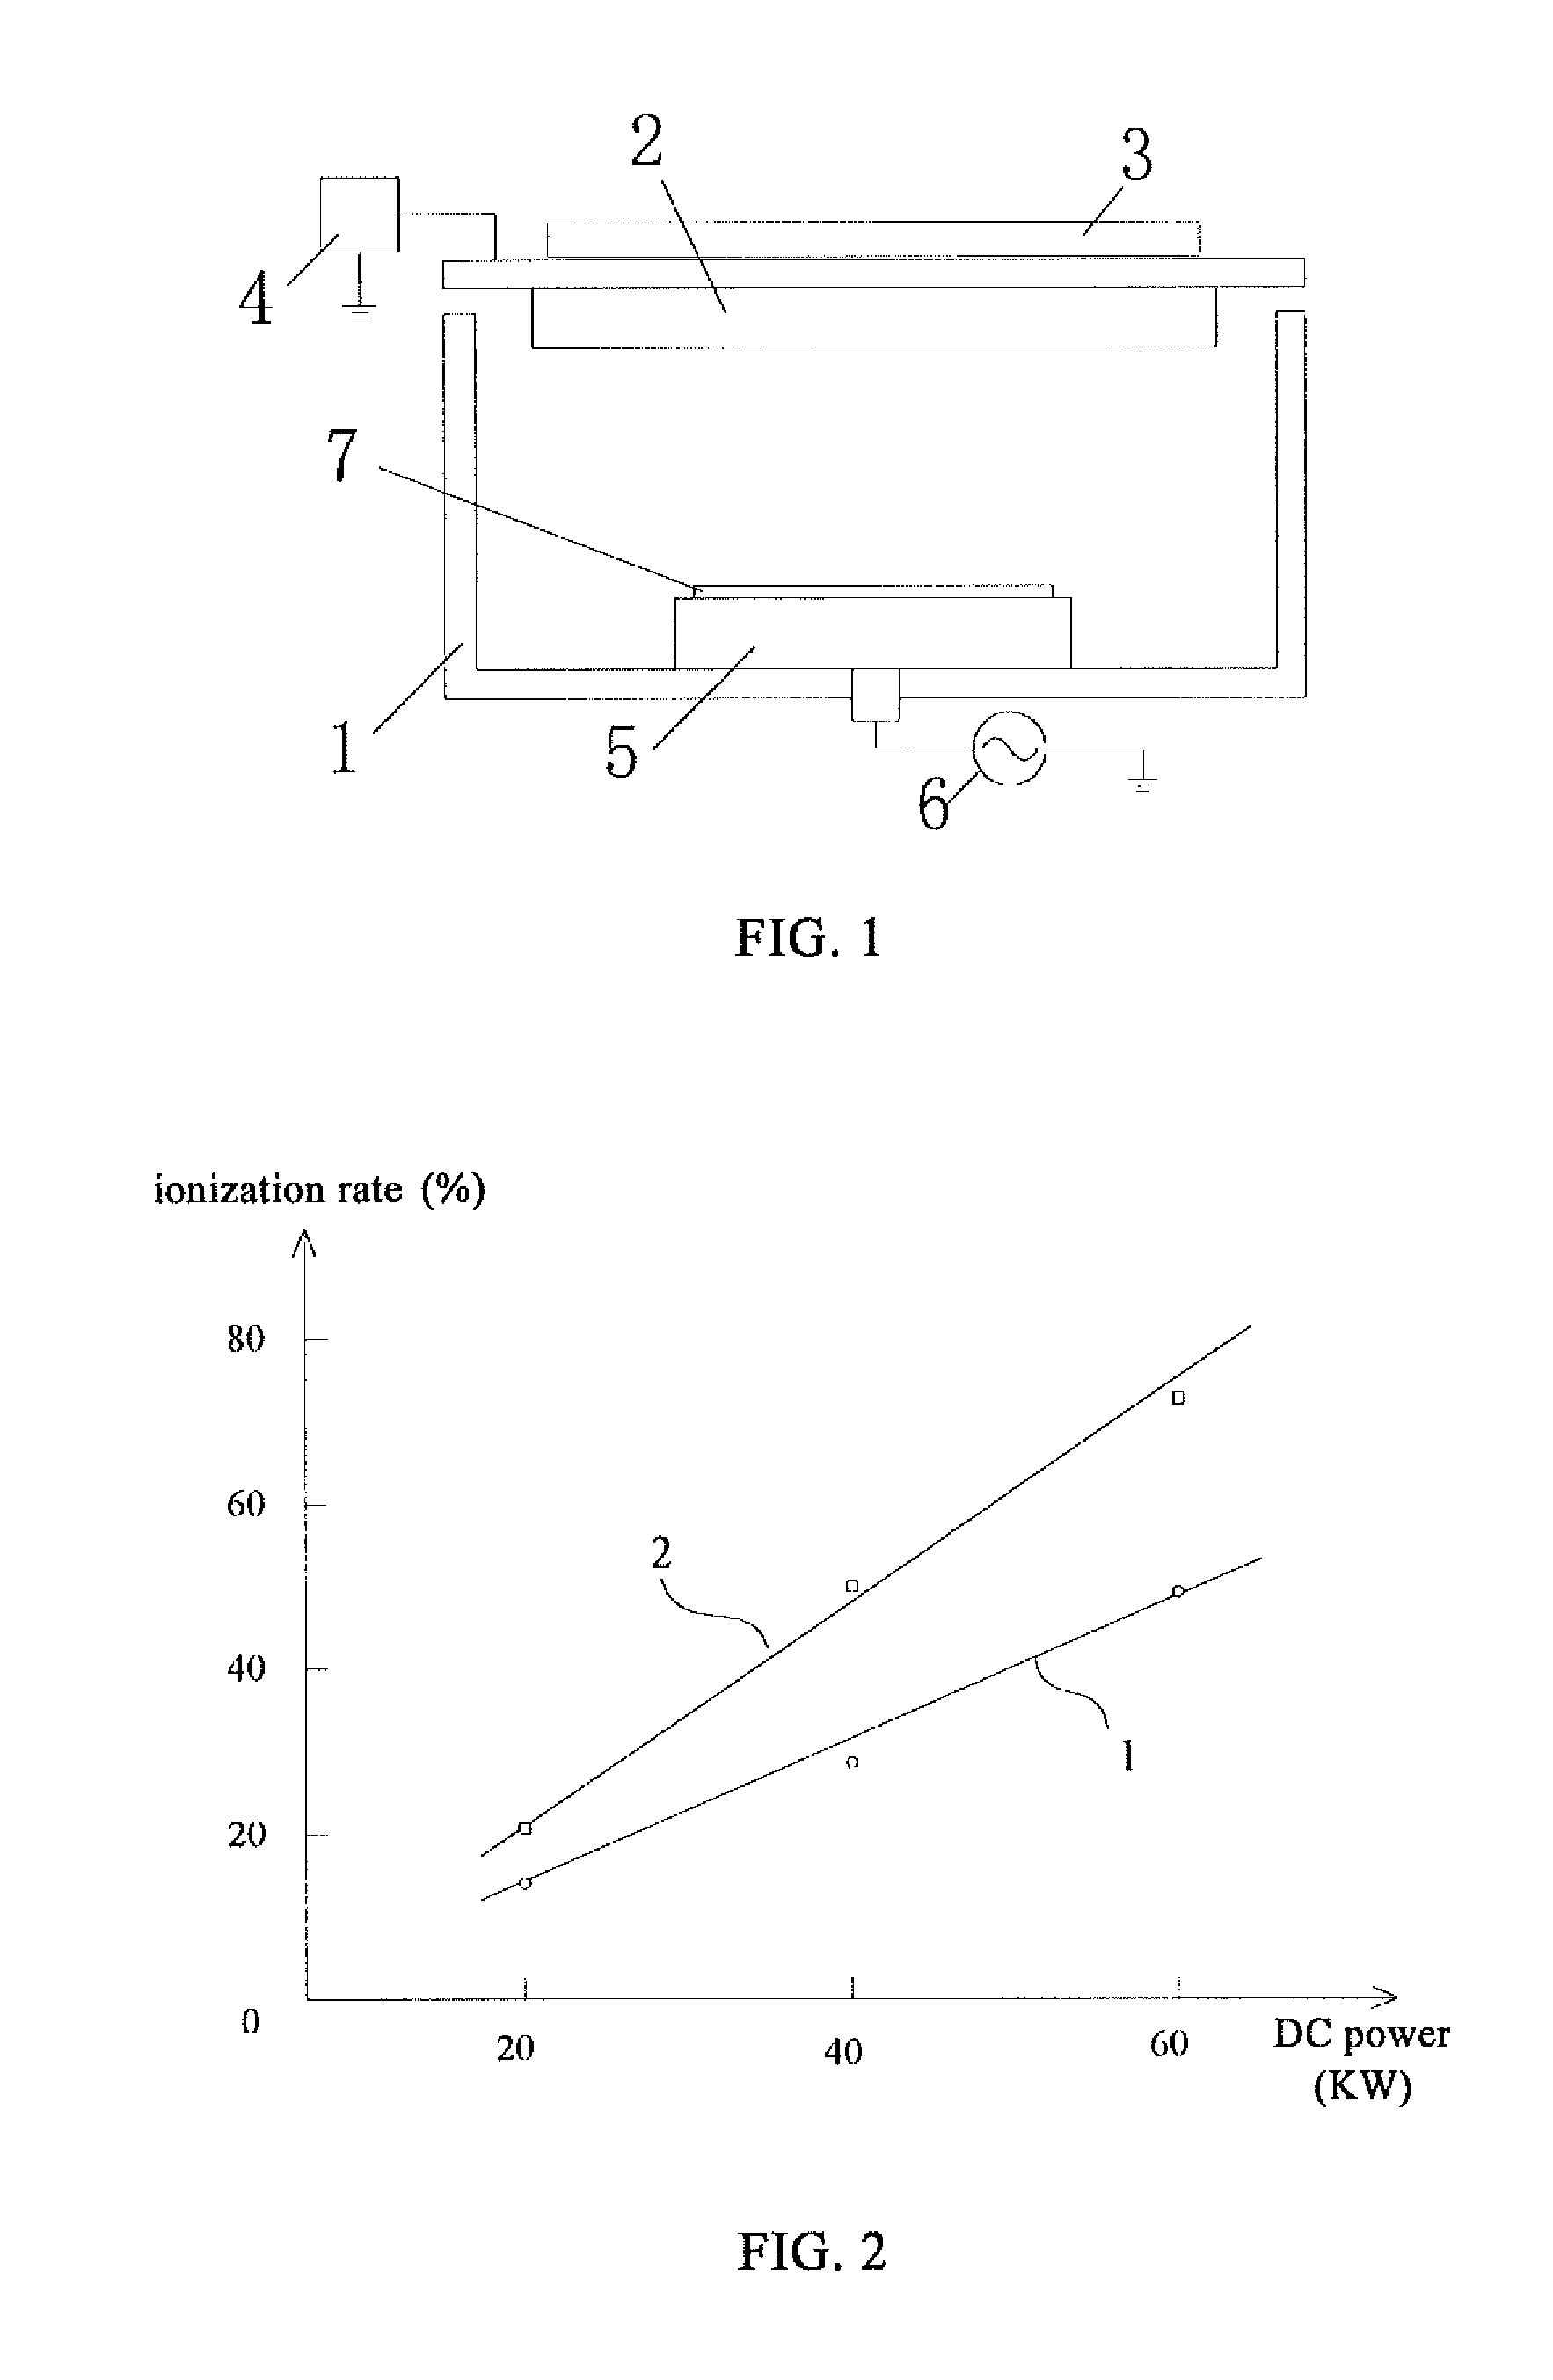 Method for applying power to target material, power supply for target material, and semiconductor processing apparatus